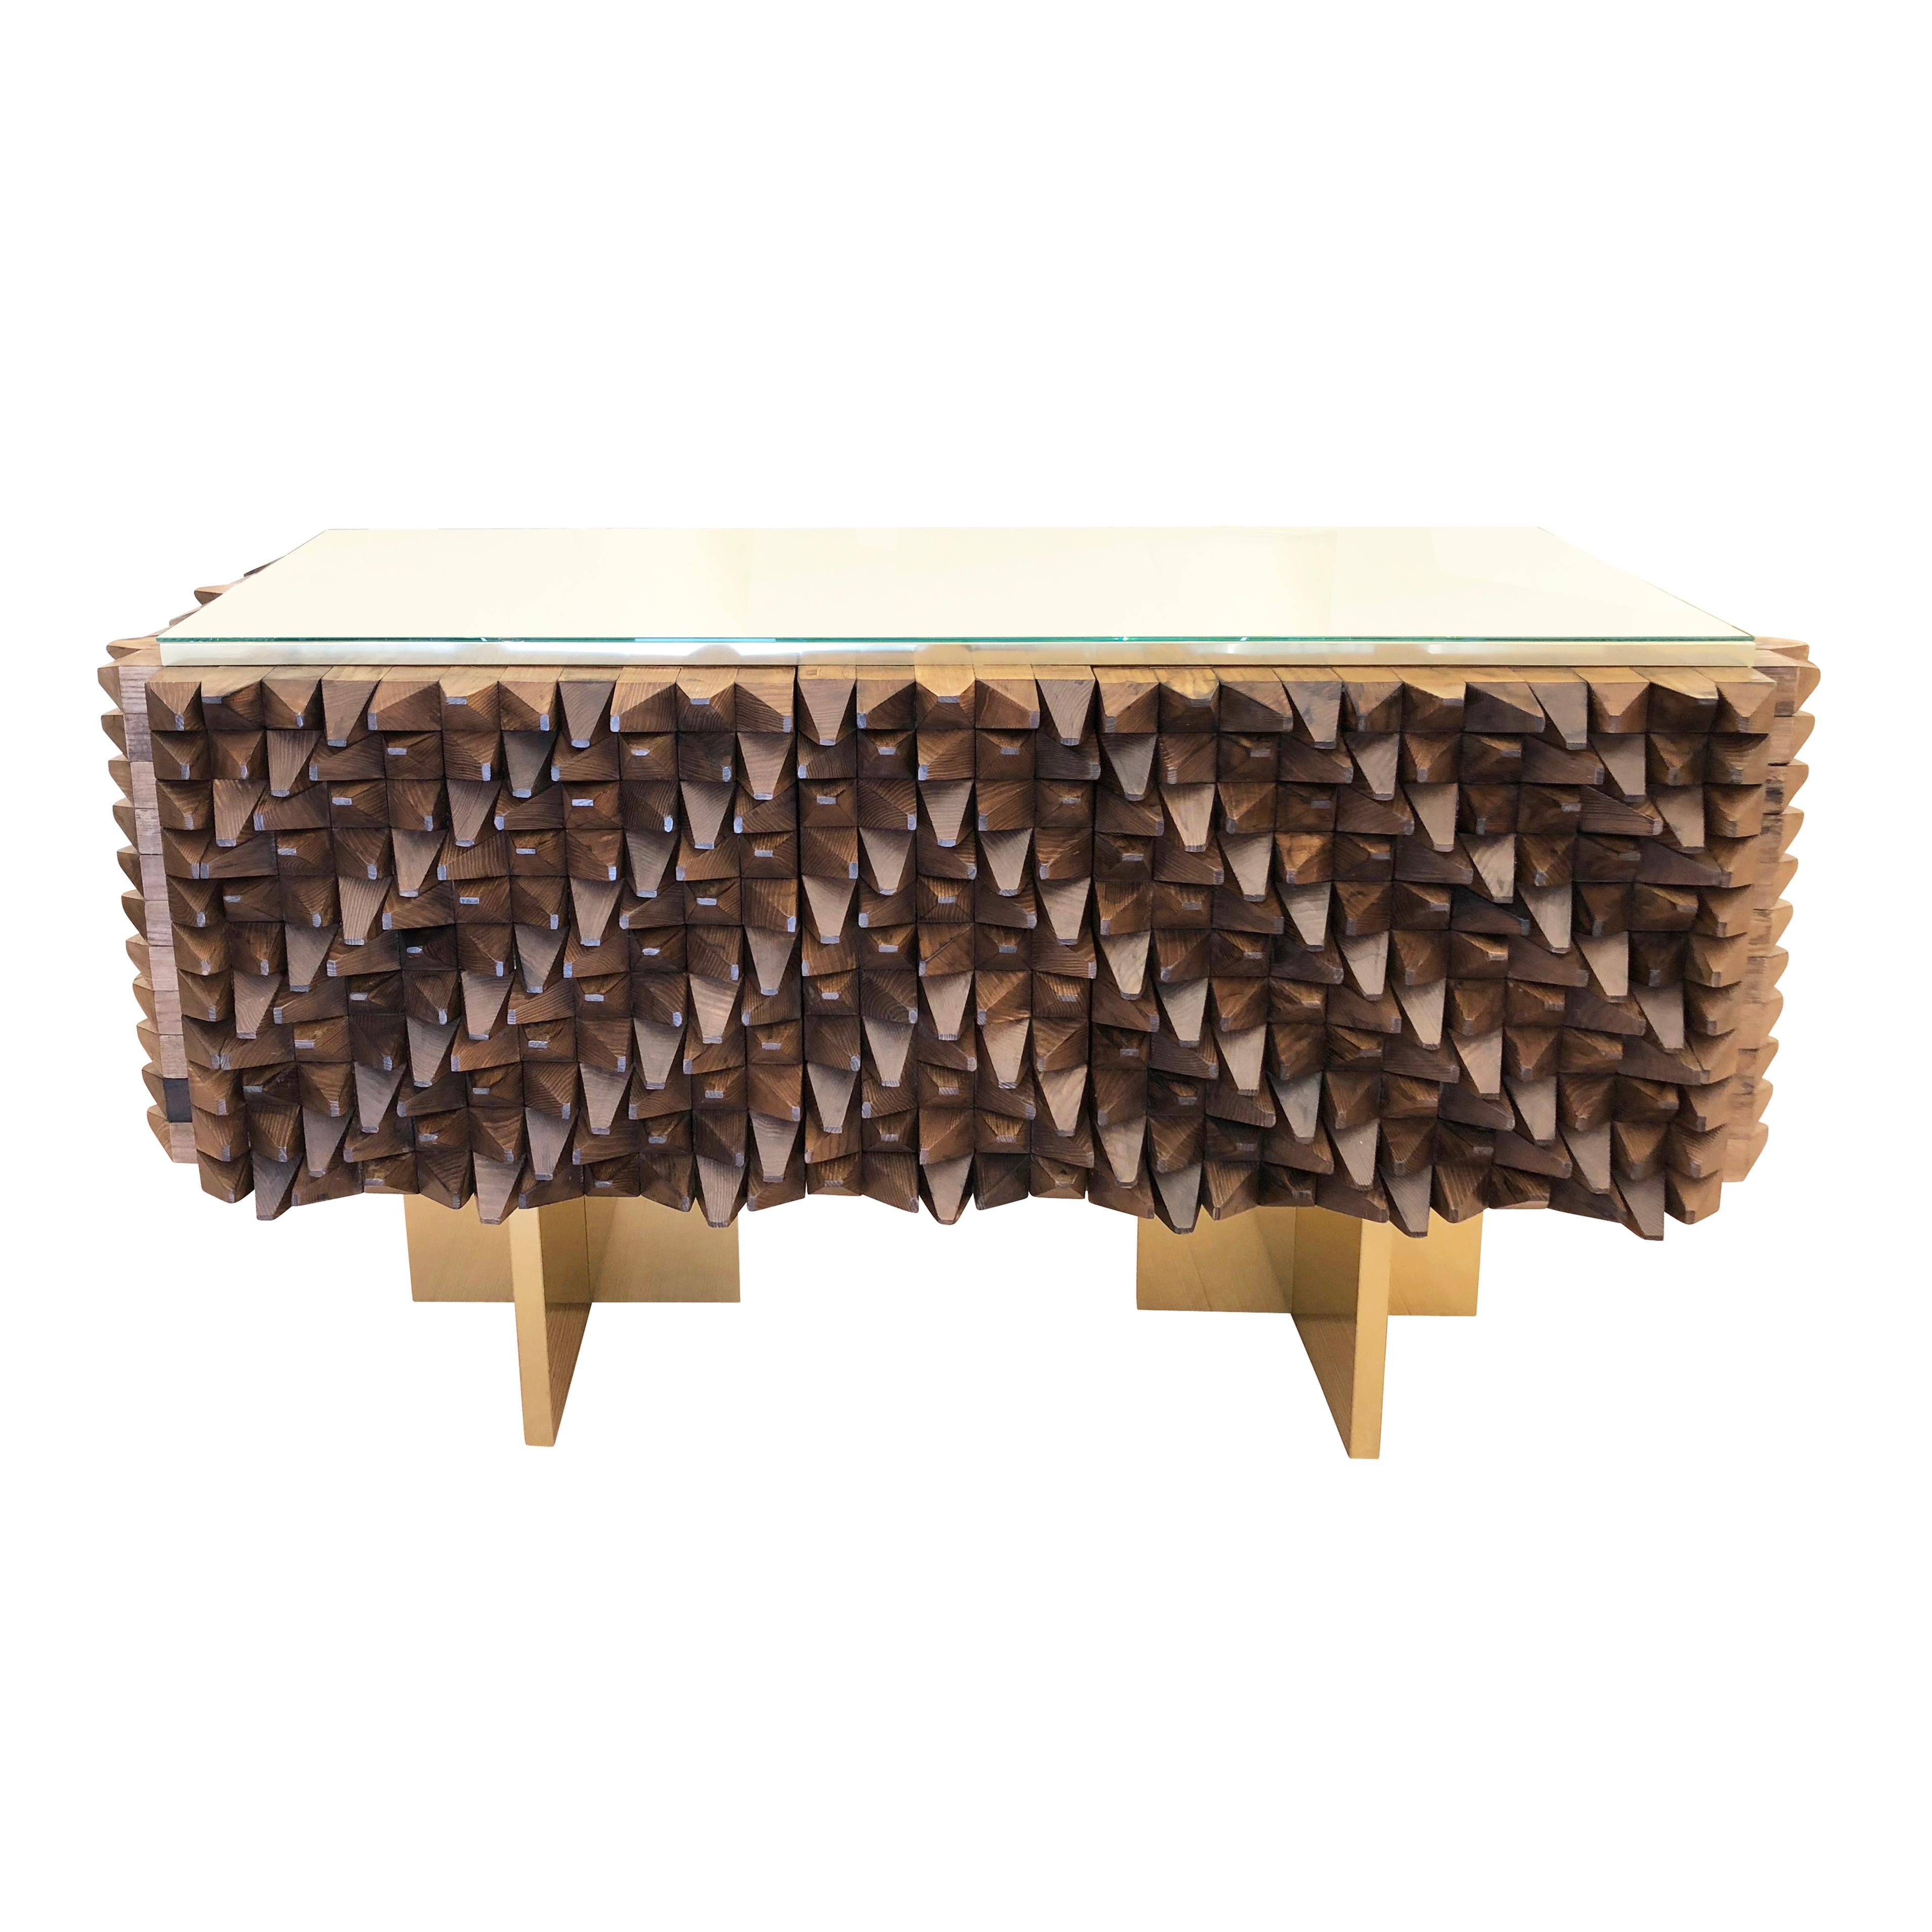 Modern Wood Credenza by Interno 43 for Gaspare Asaro